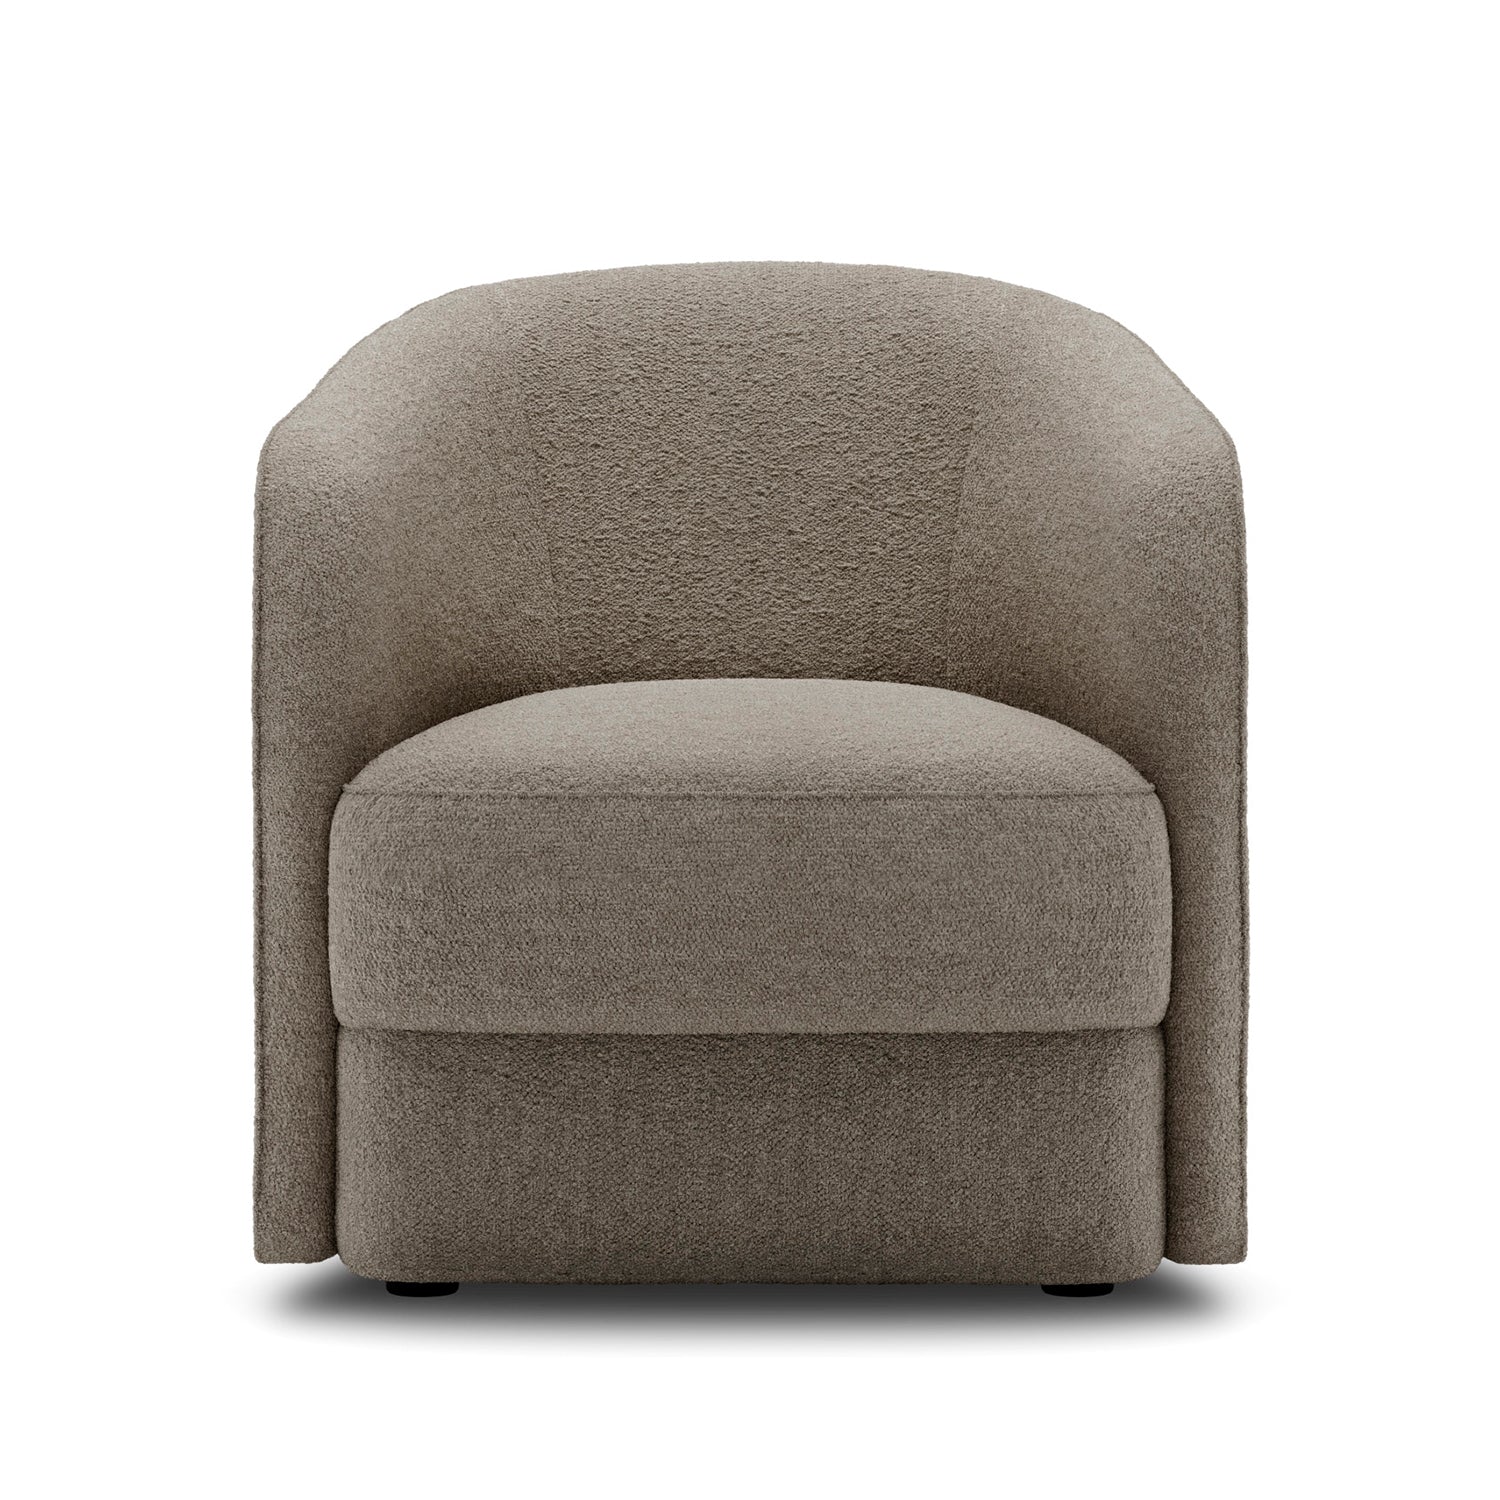 New Works Covent Lounge Chair Narrow in hemp